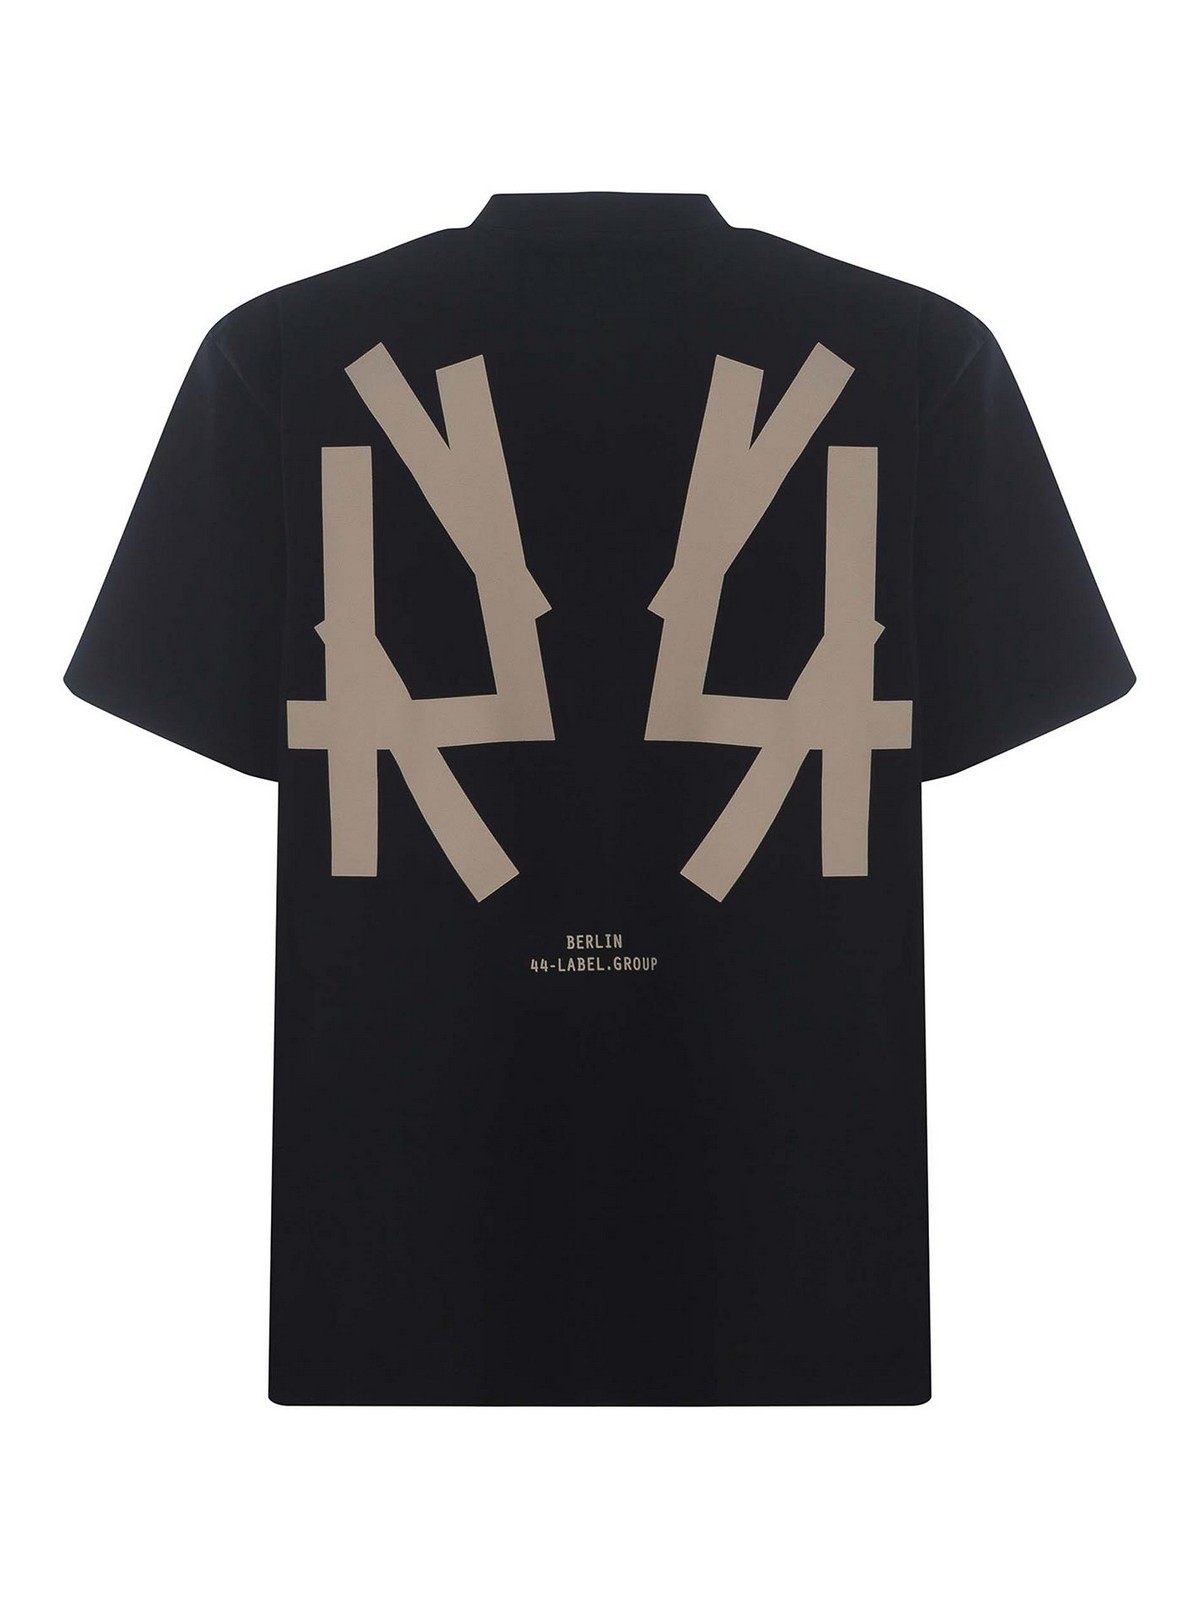 Tシャツ 44 Label Group - Tシャツ - 黒 - B0030376FA141P396 | THEBS